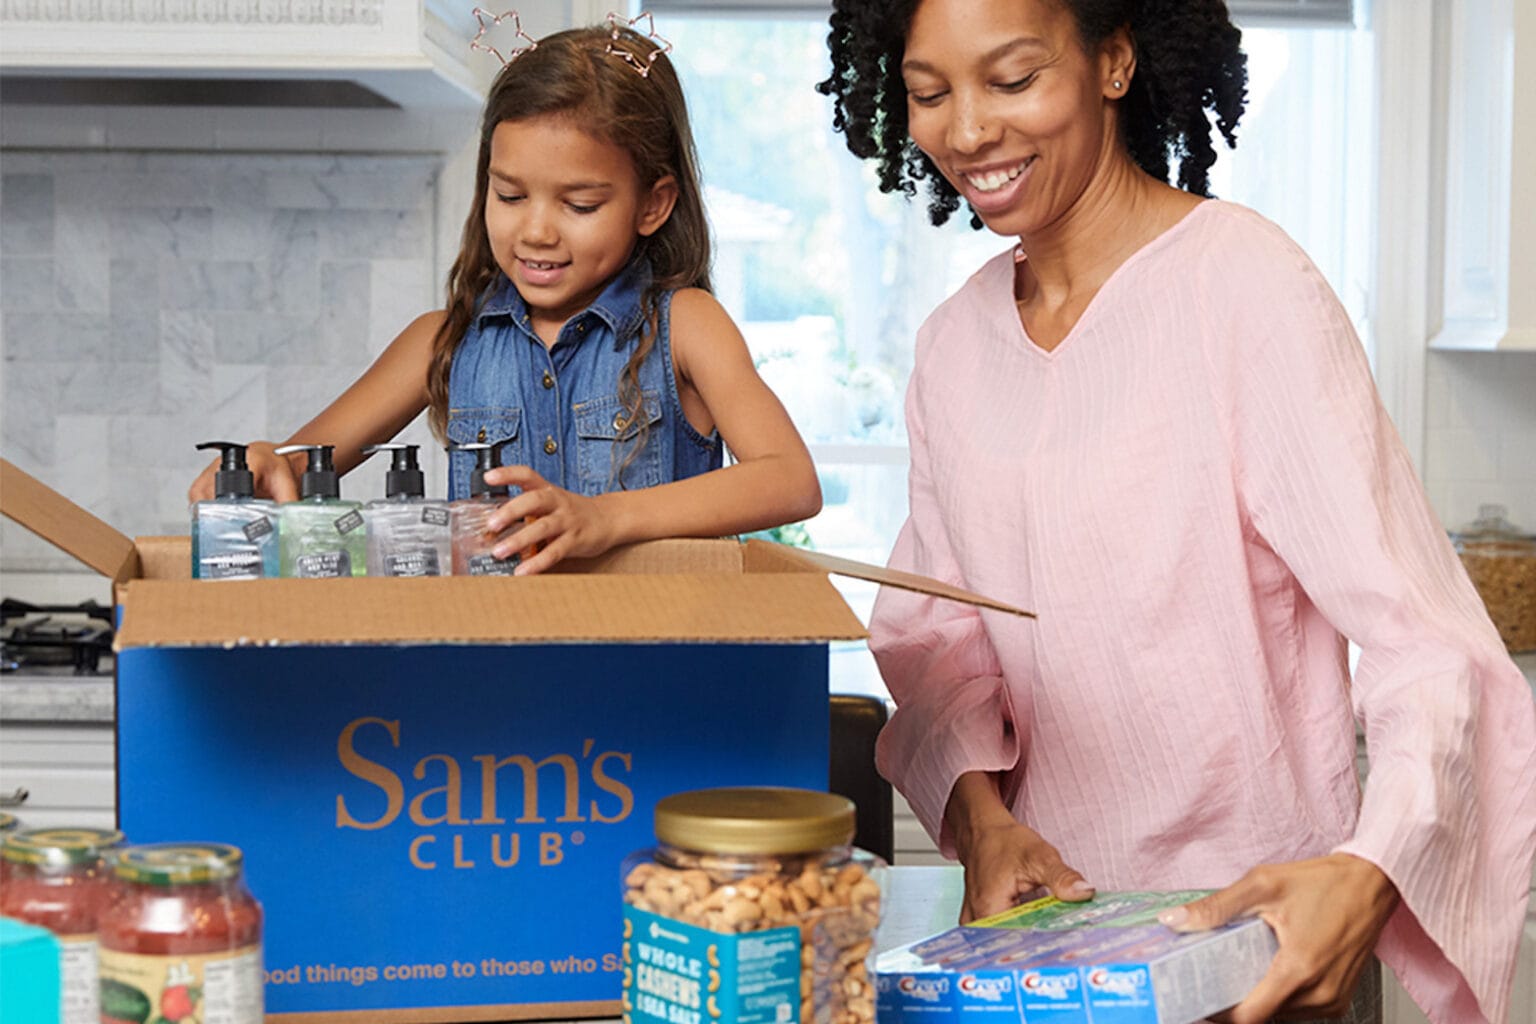 A Sam's Club membership is just $24.99, but it comes with an extra perk too.